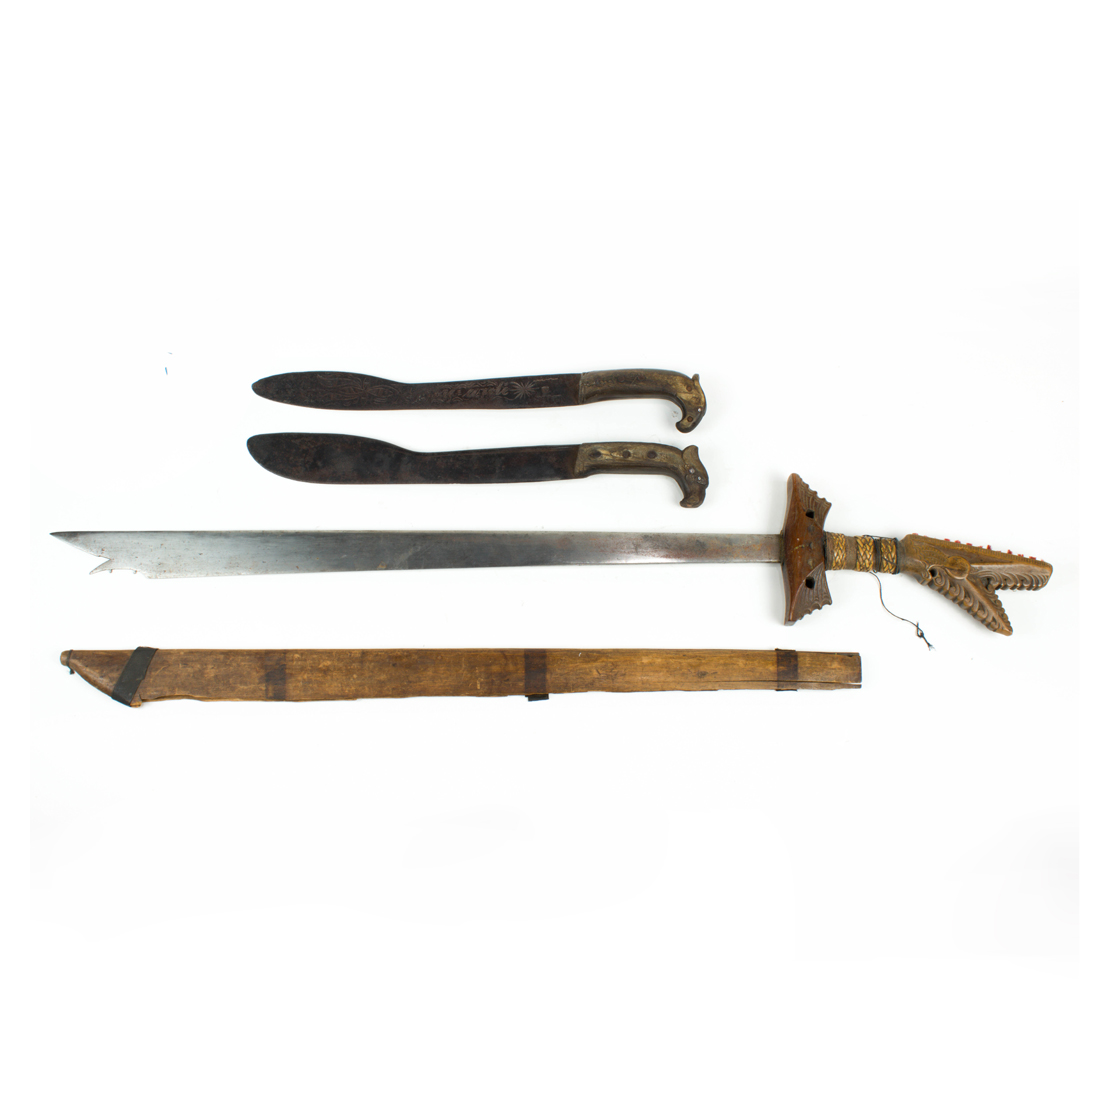  LOT OF 3 ETHNIC SWORDS THE LARGEST 2d2692